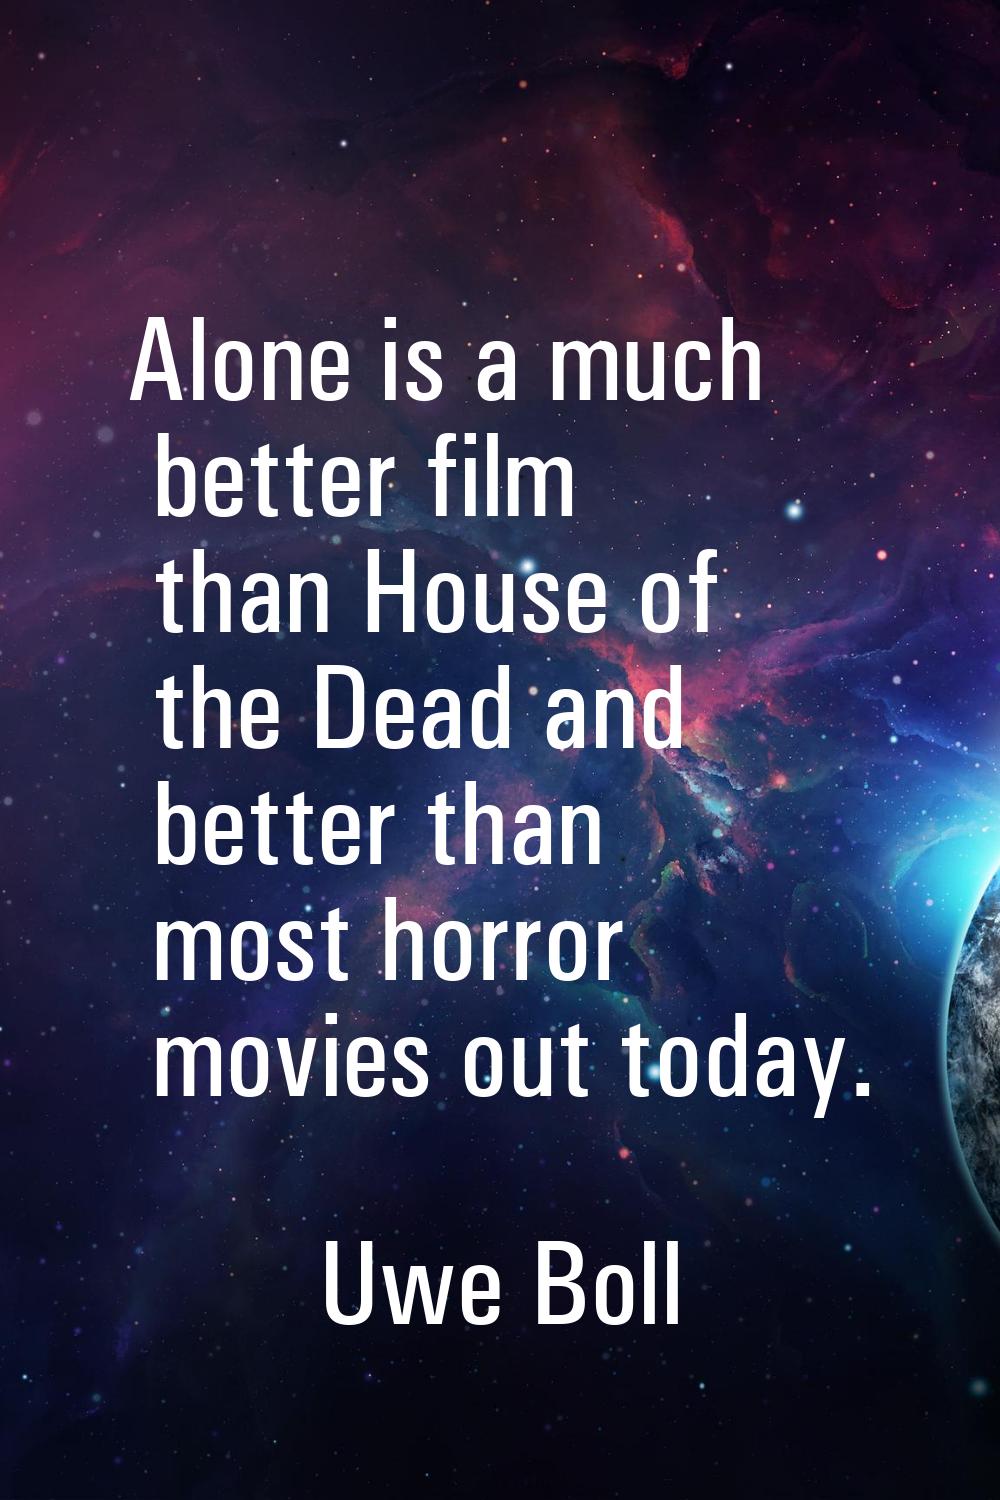 Alone is a much better film than House of the Dead and better than most horror movies out today.